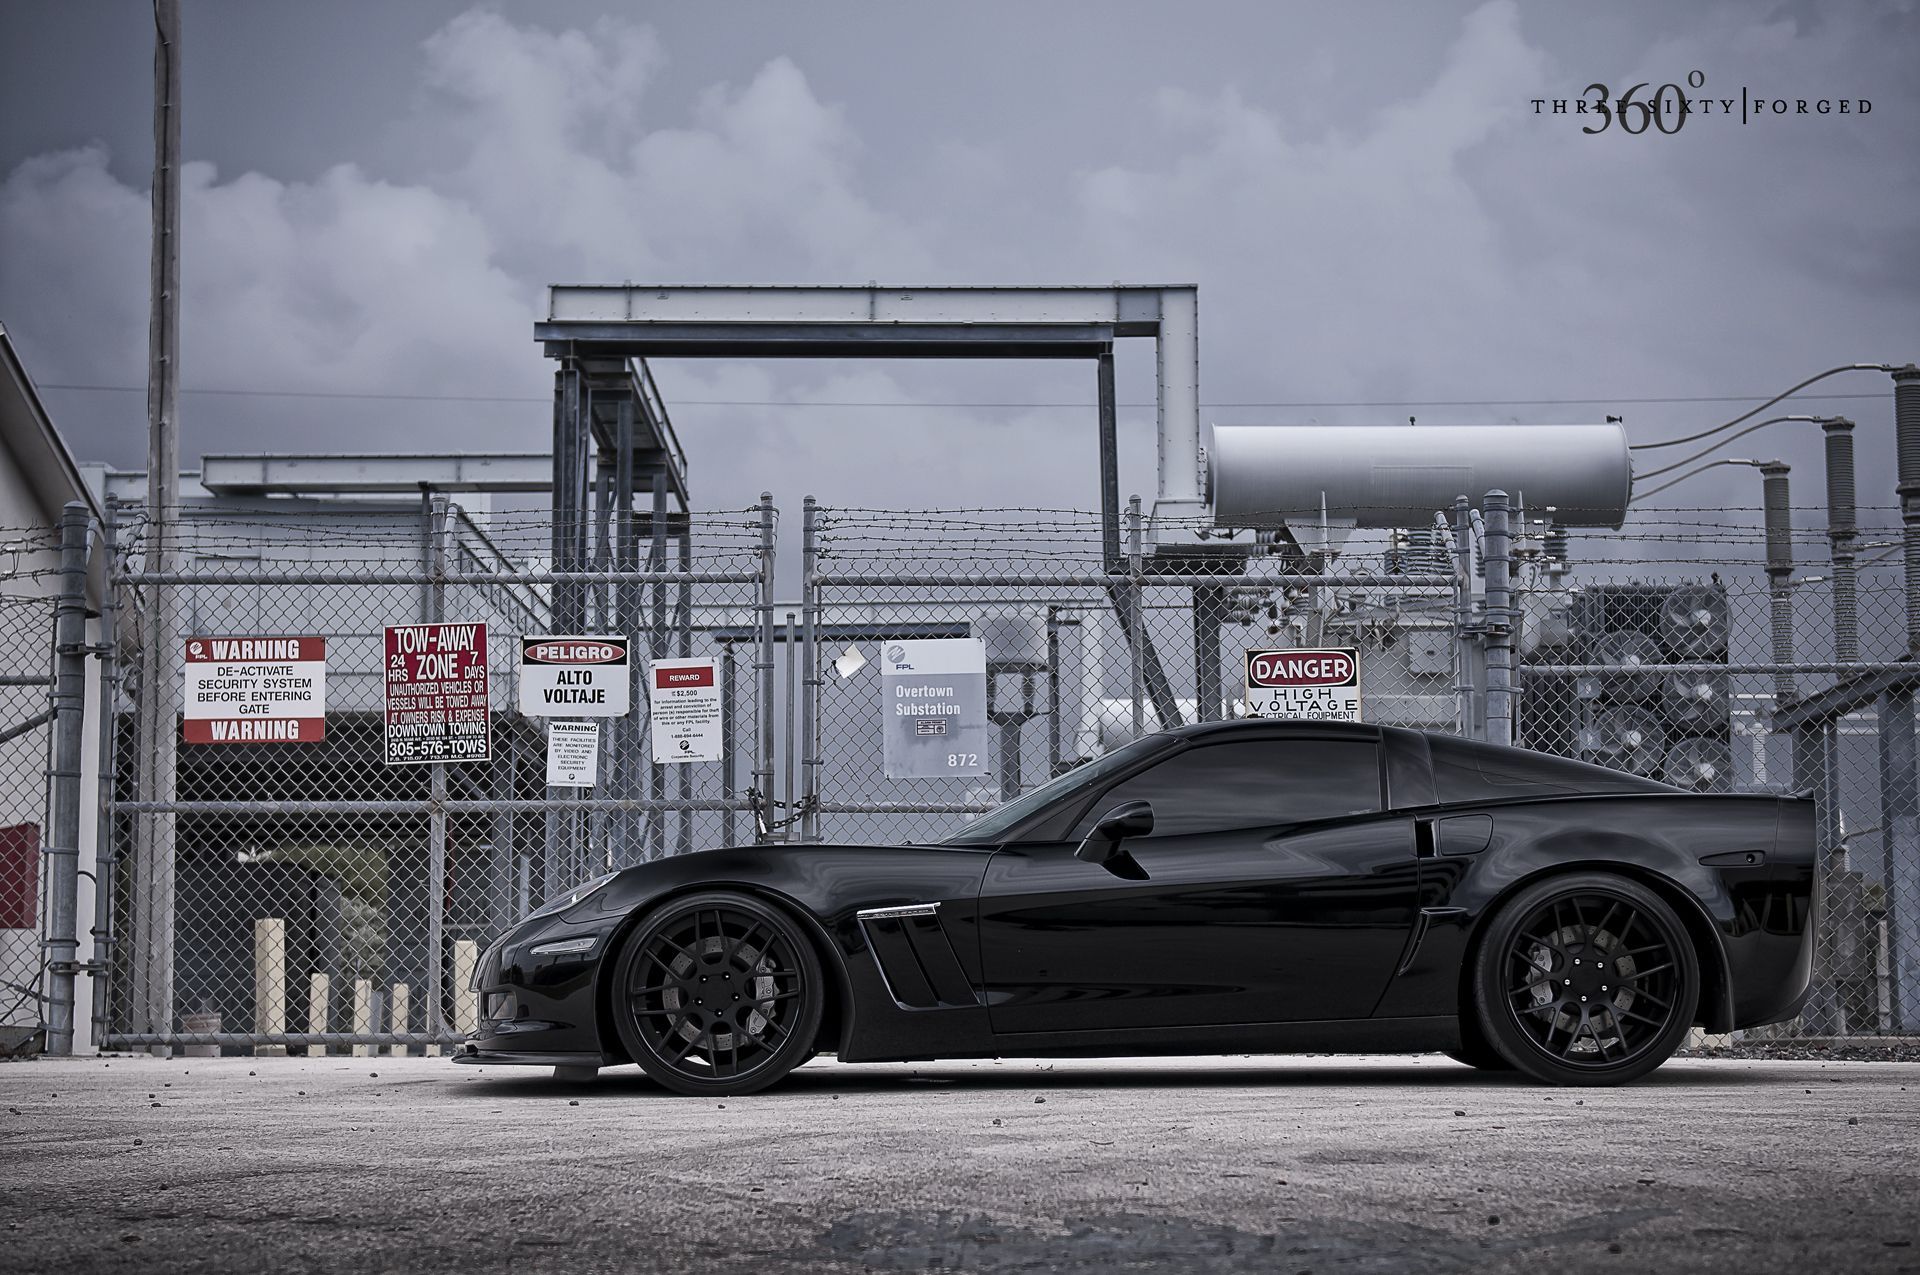 C6 Corvette Grand Sport. Credit to 360 Forged :D. Corvette grand sport, Corvette, Chevrolet corvette